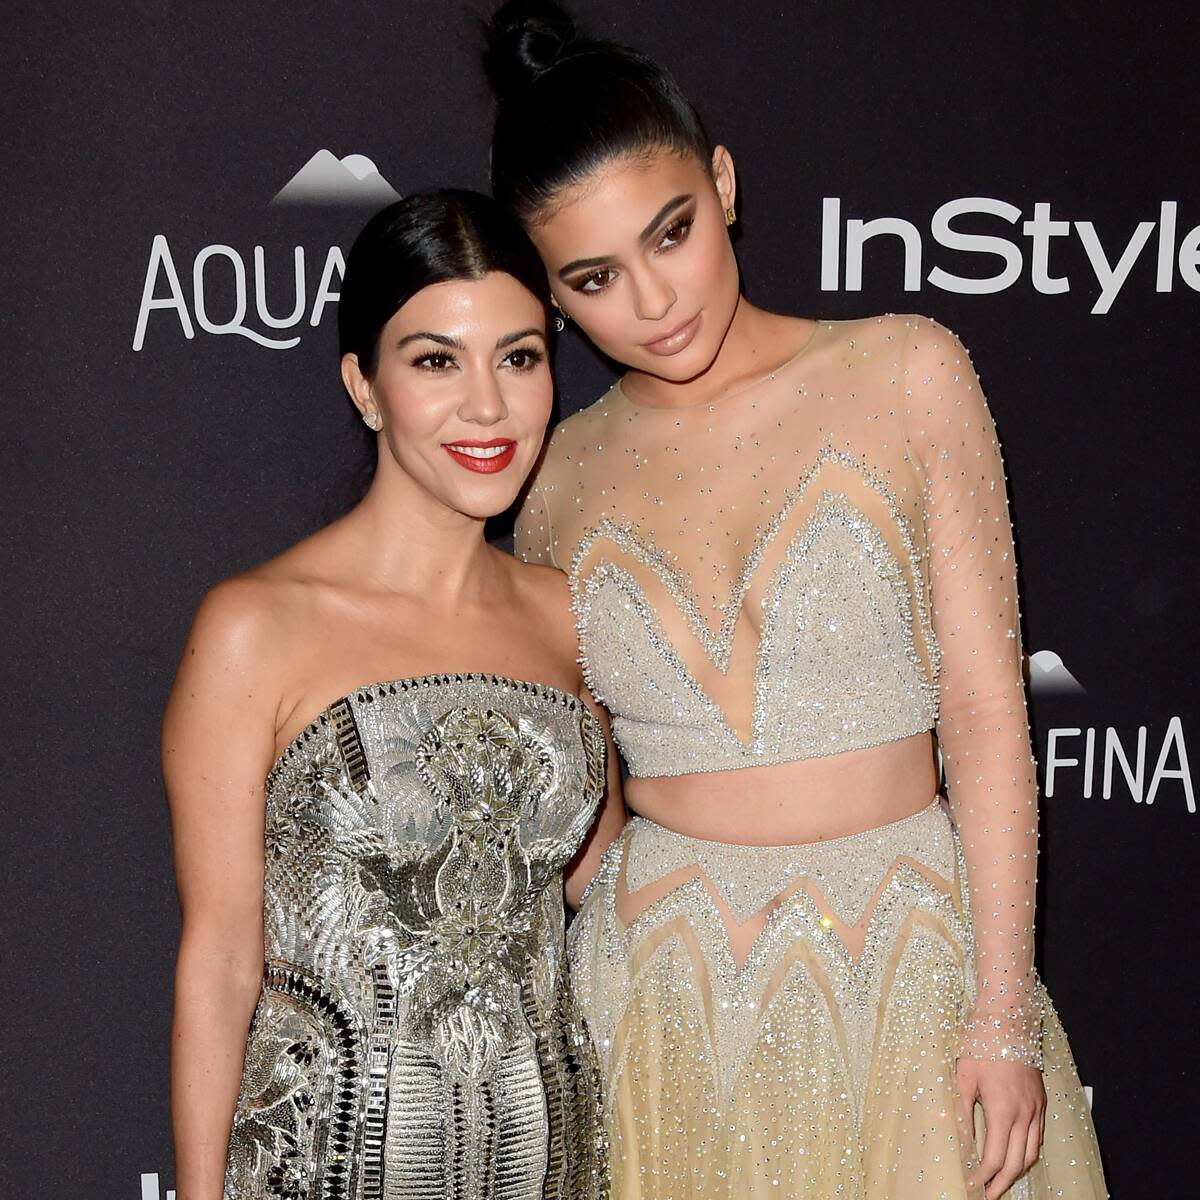 Kourtney Kardashian and Kylie Jenner relive the side effects of Kim’s “less interesting to look at” shadow